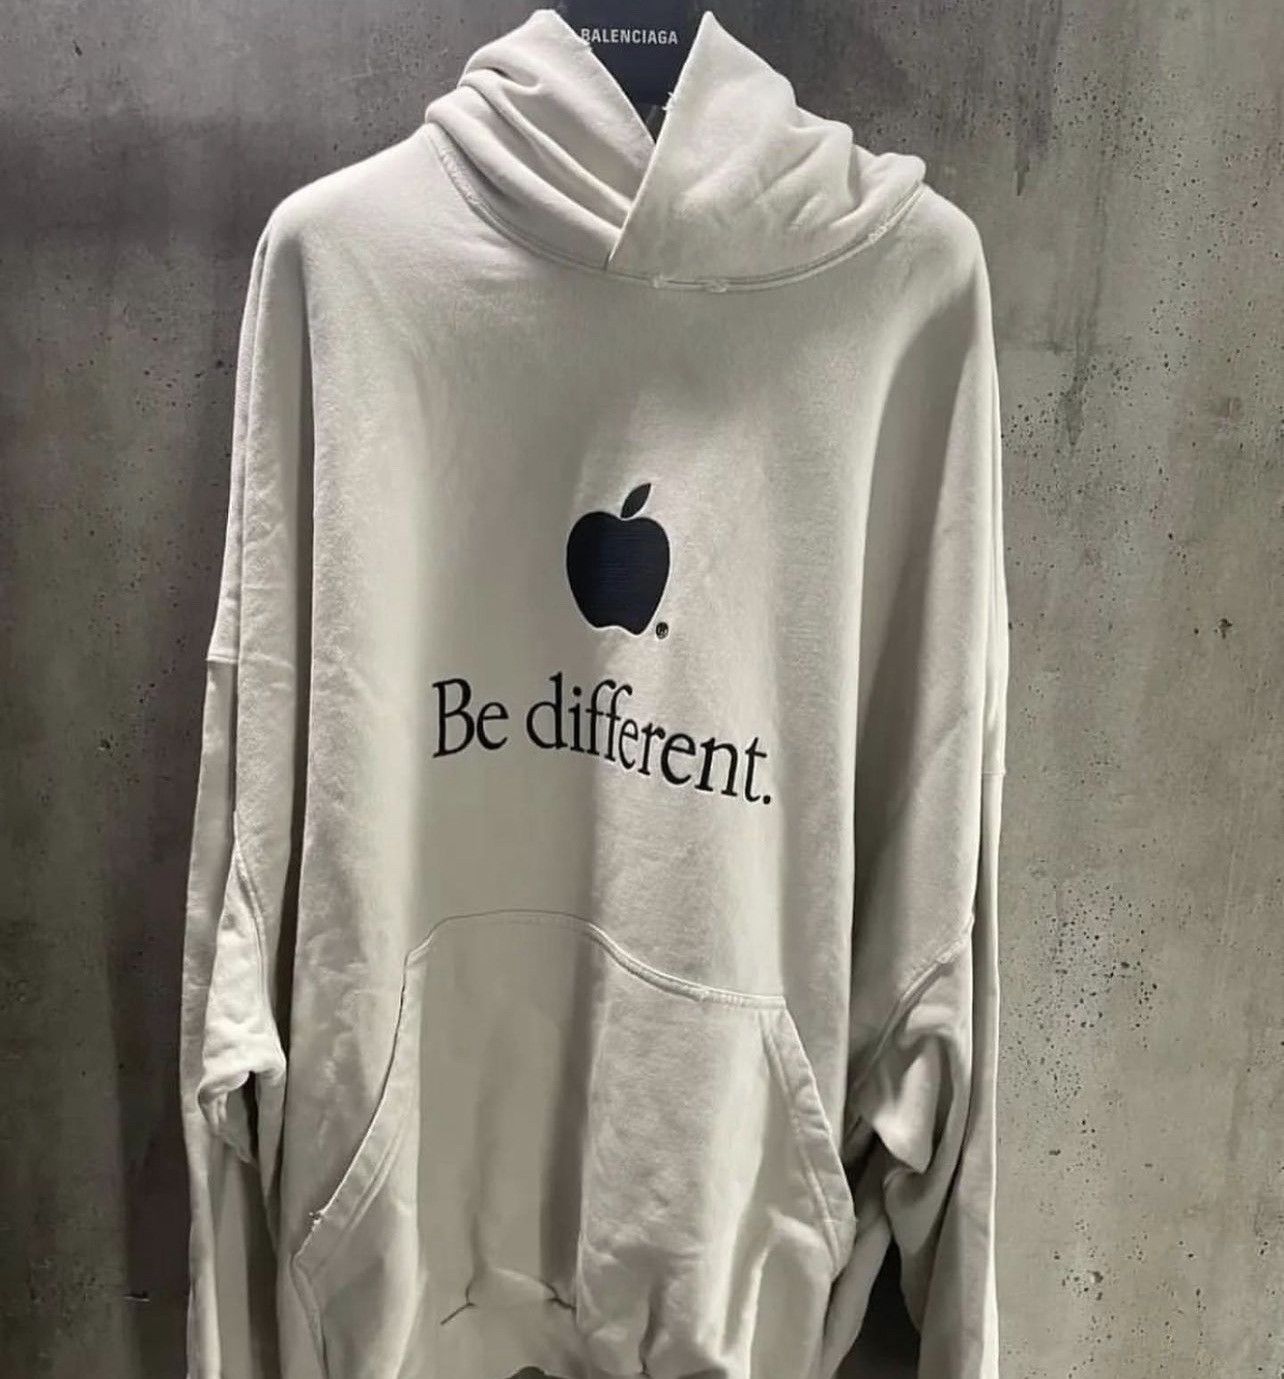 Balenciaga Be Different Hoodie | Grailed